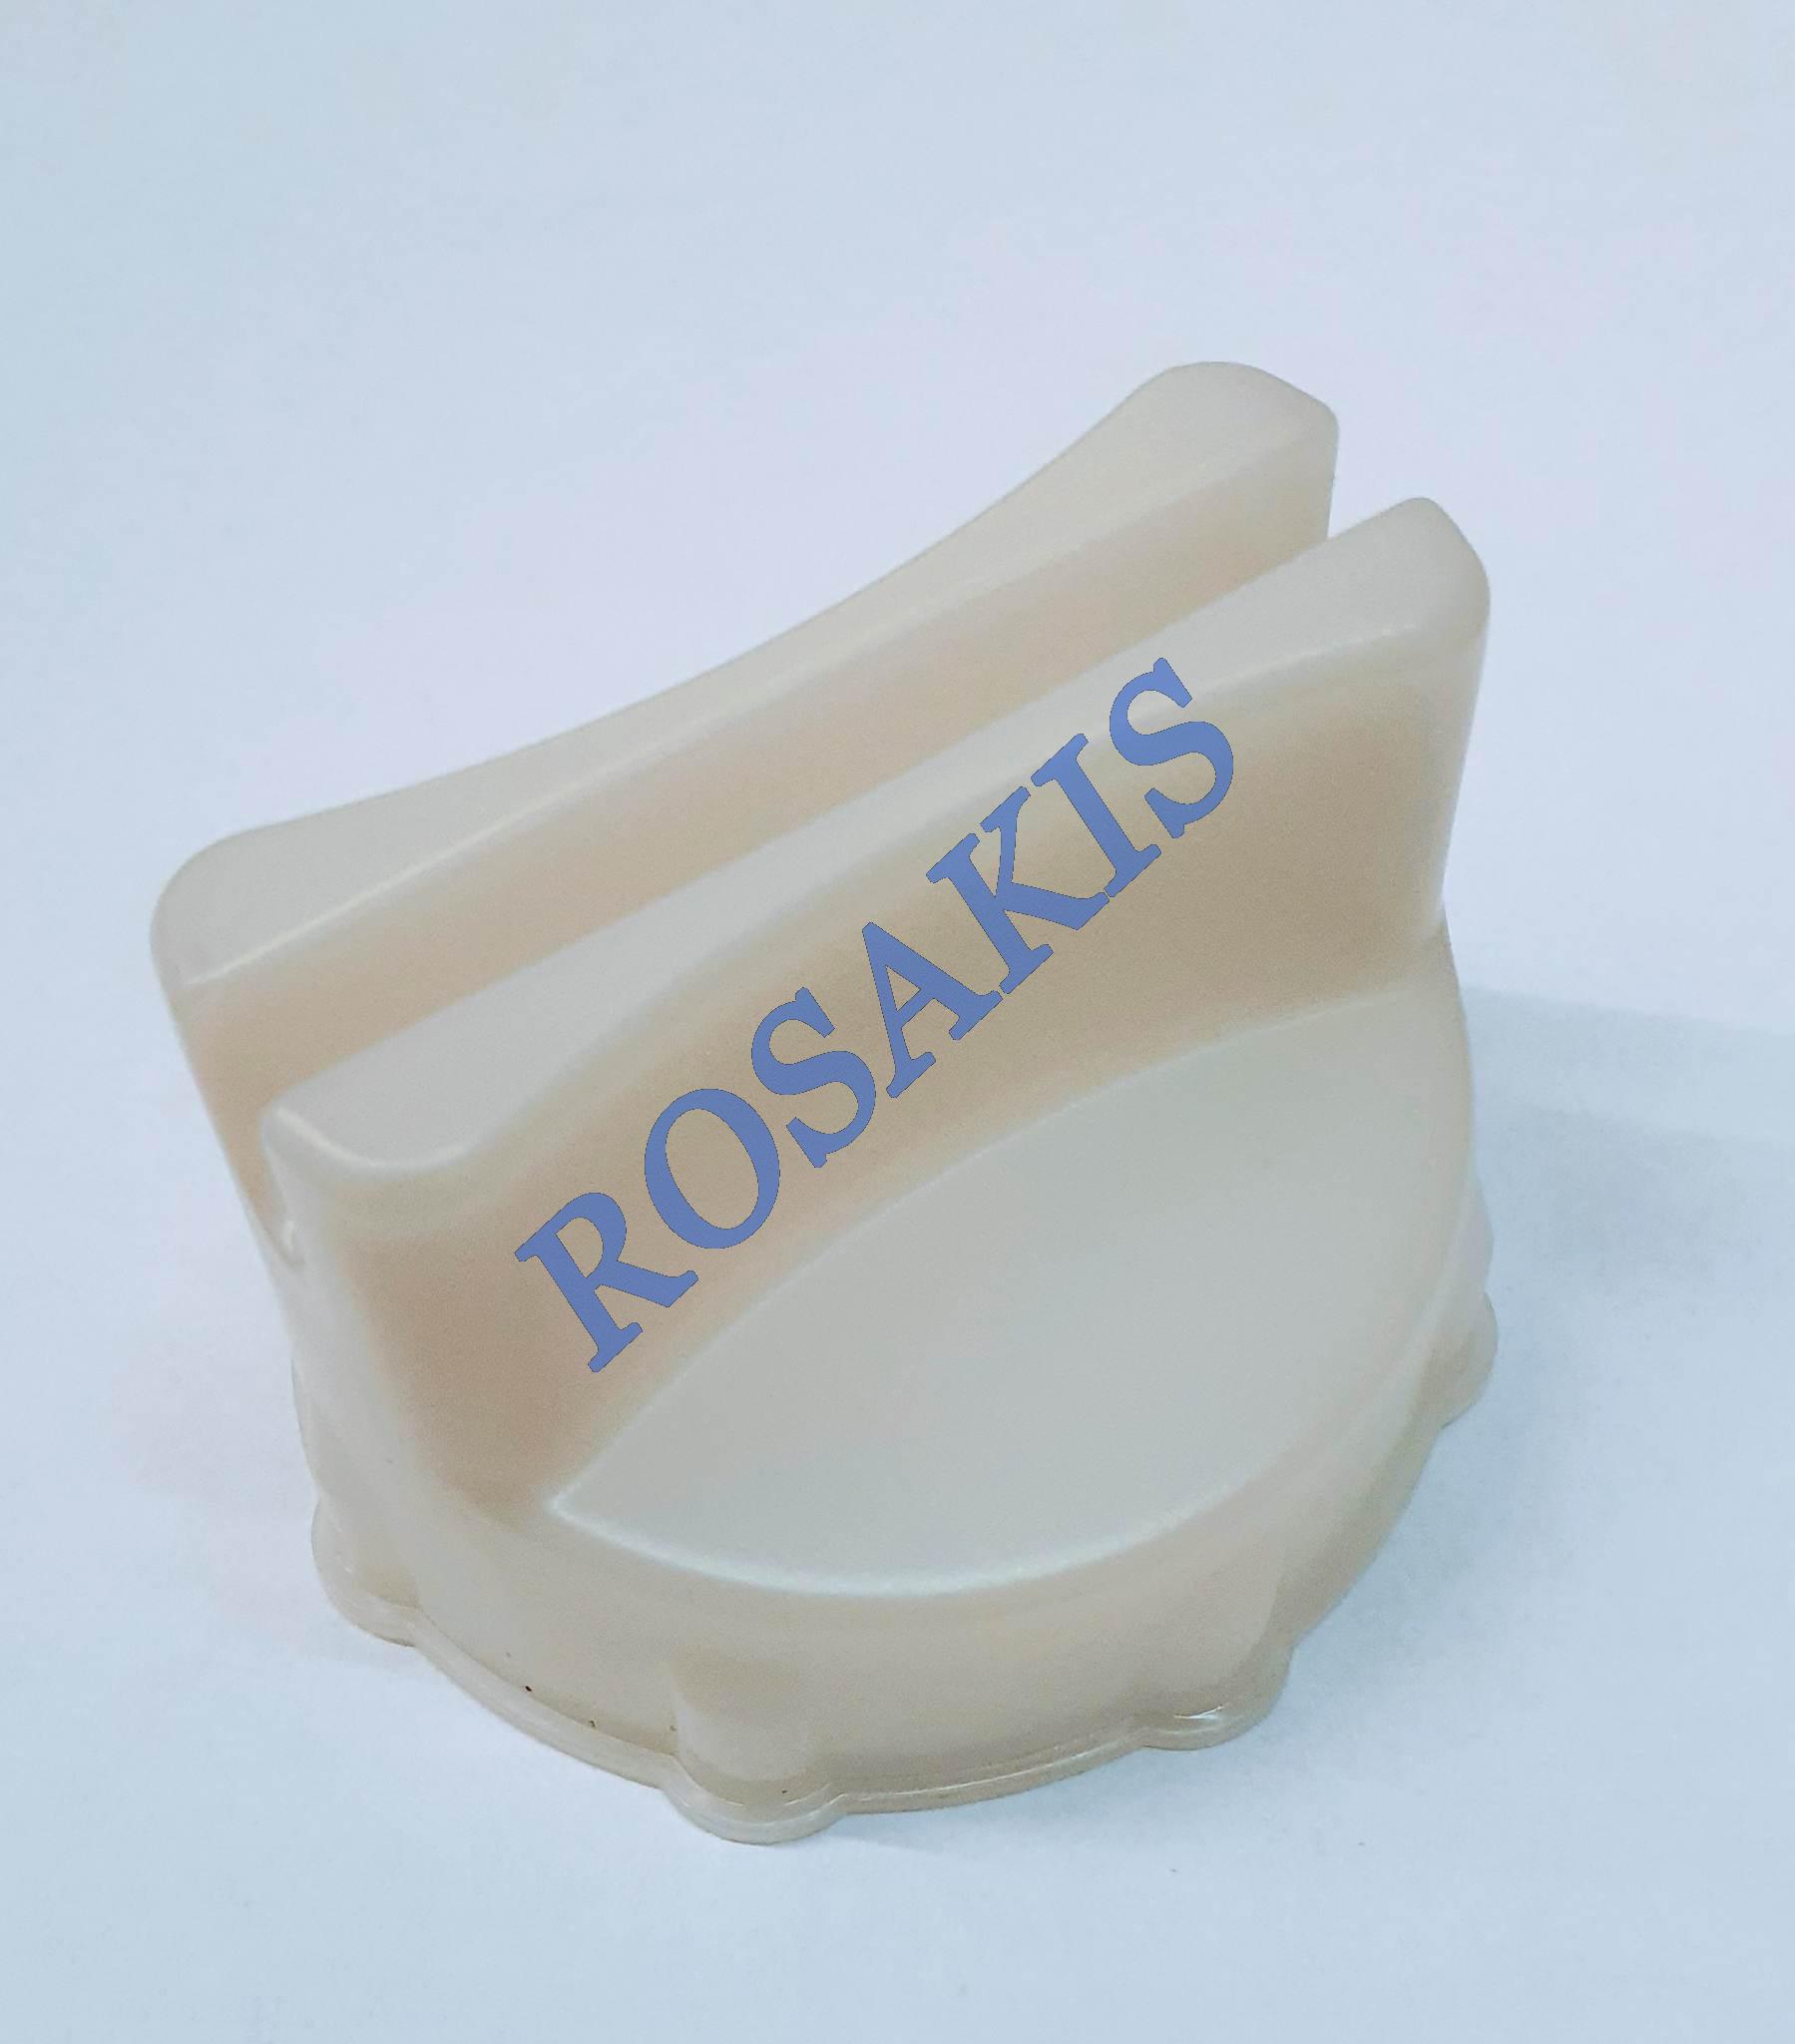 PLASTIC COVER FOR OVEN LAMP SIEENS-BOSCH 00647309